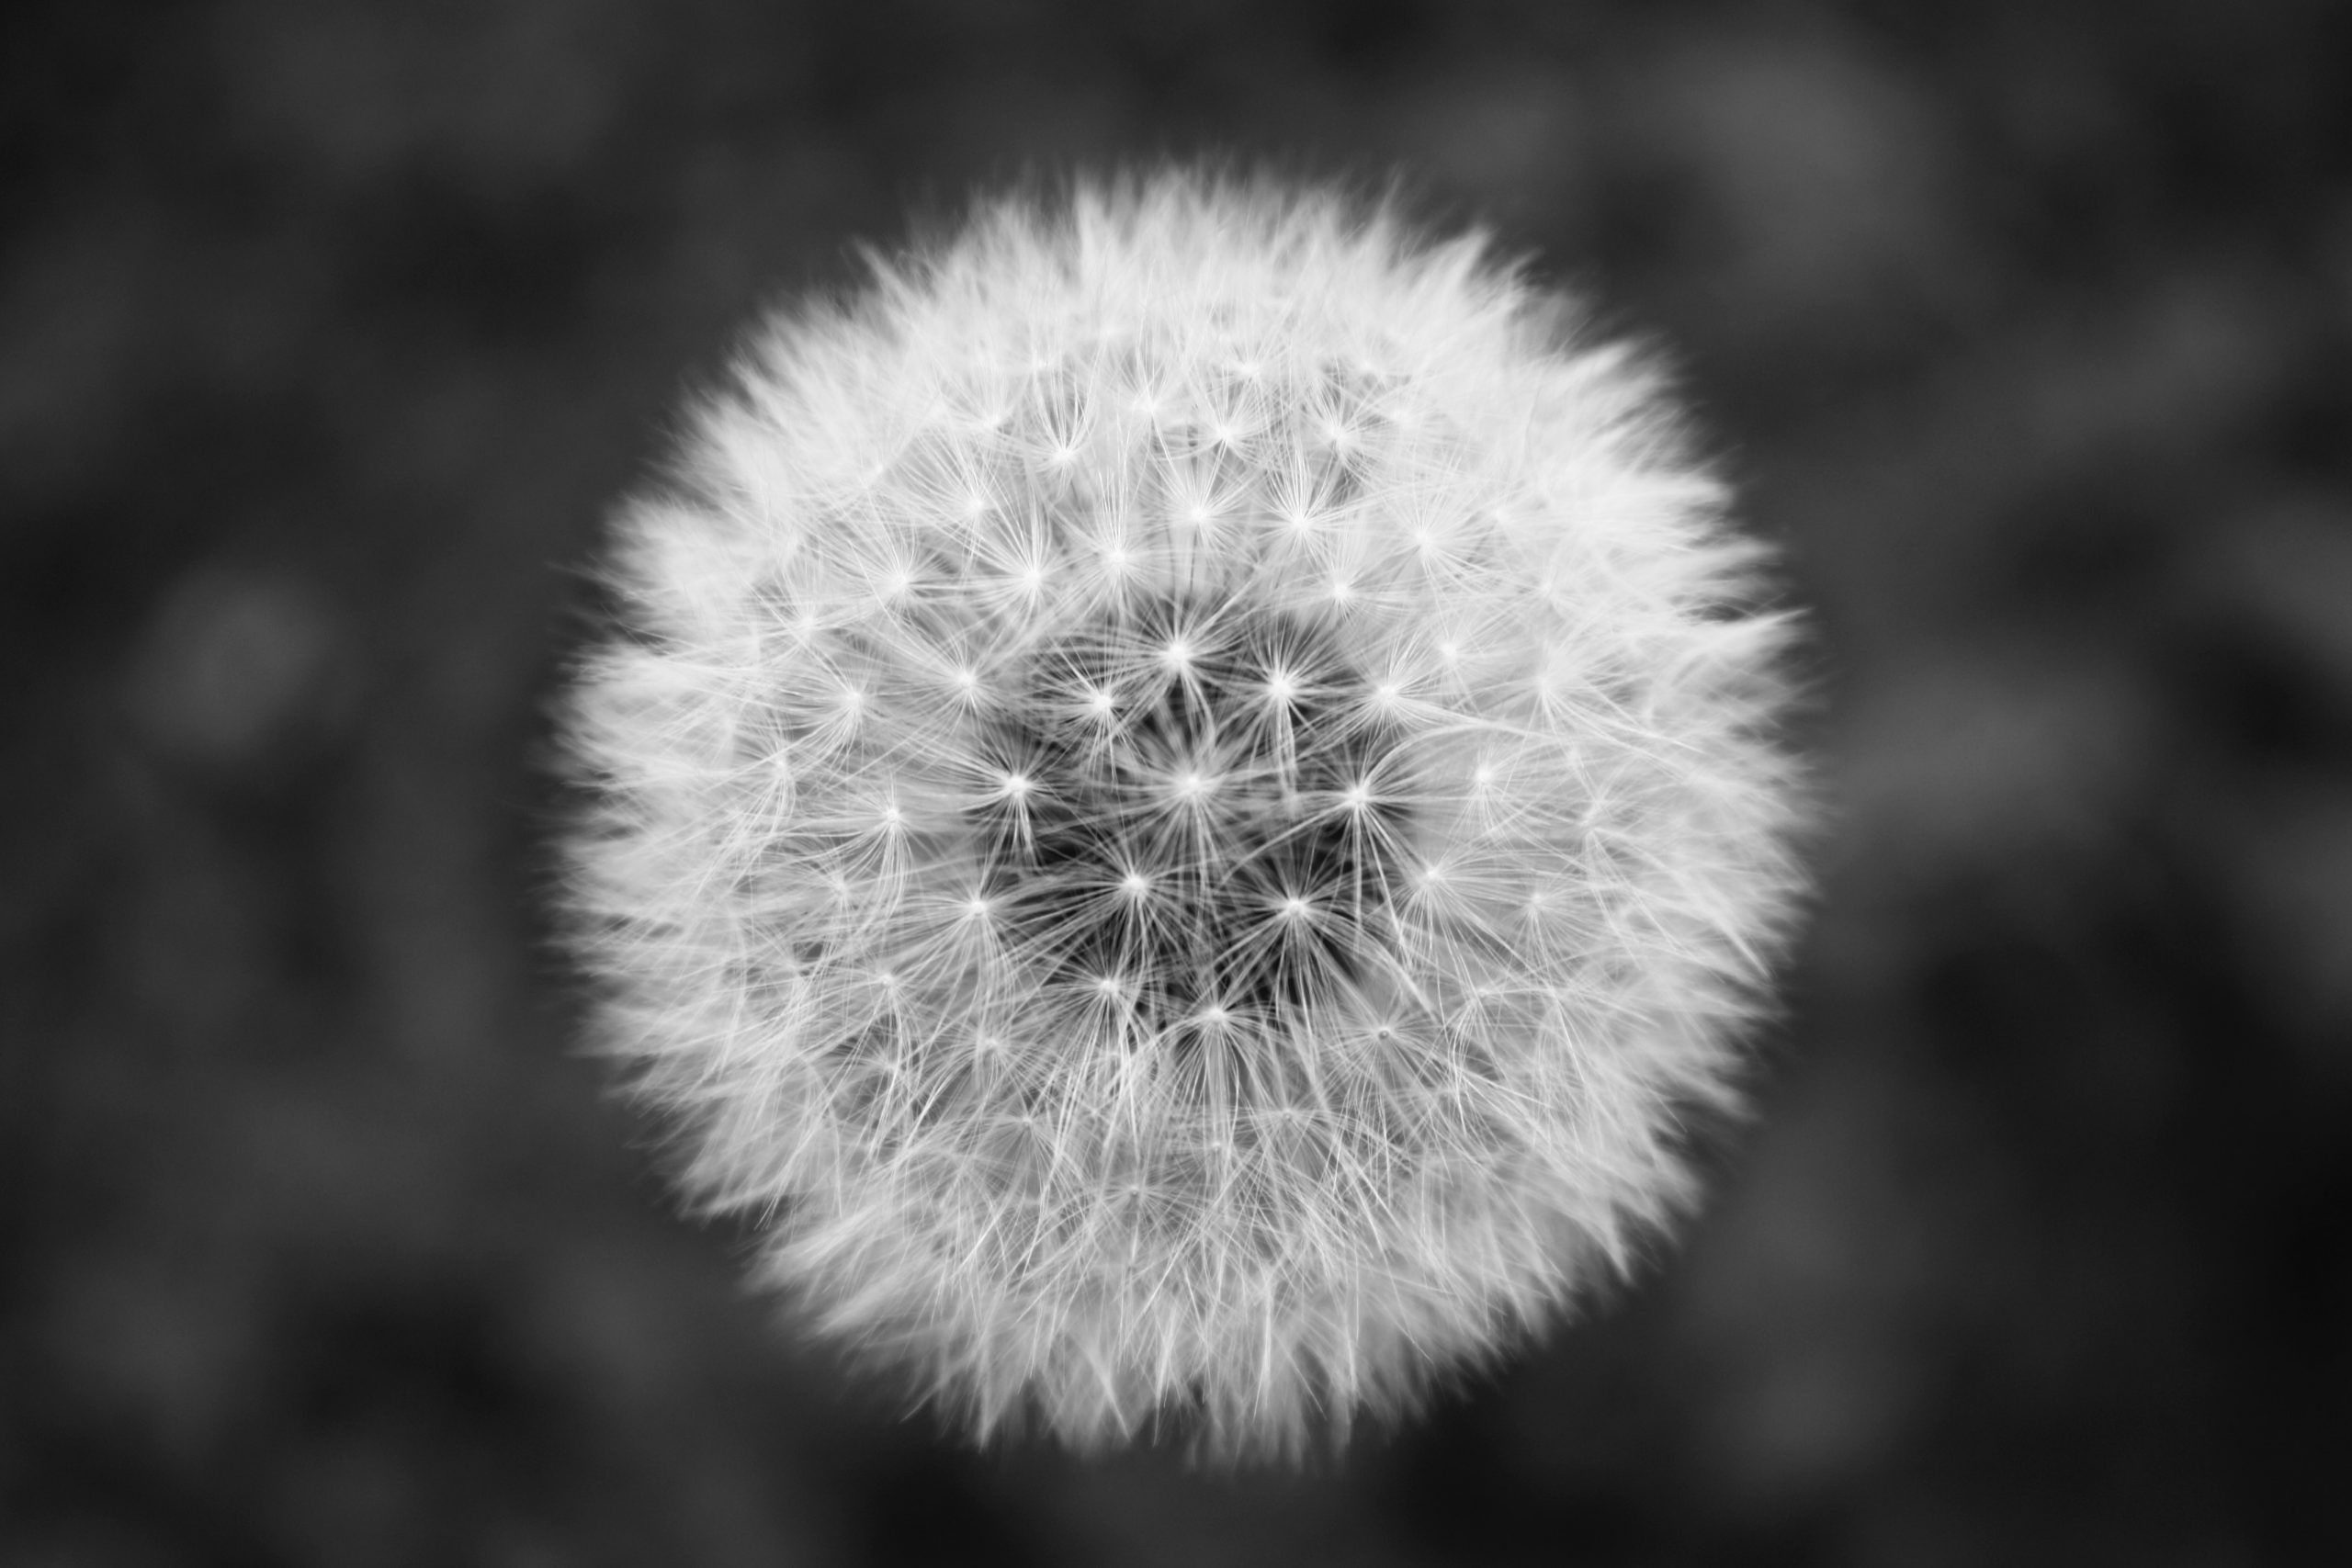 dandelion head black and white close up close up view 21323 scaled